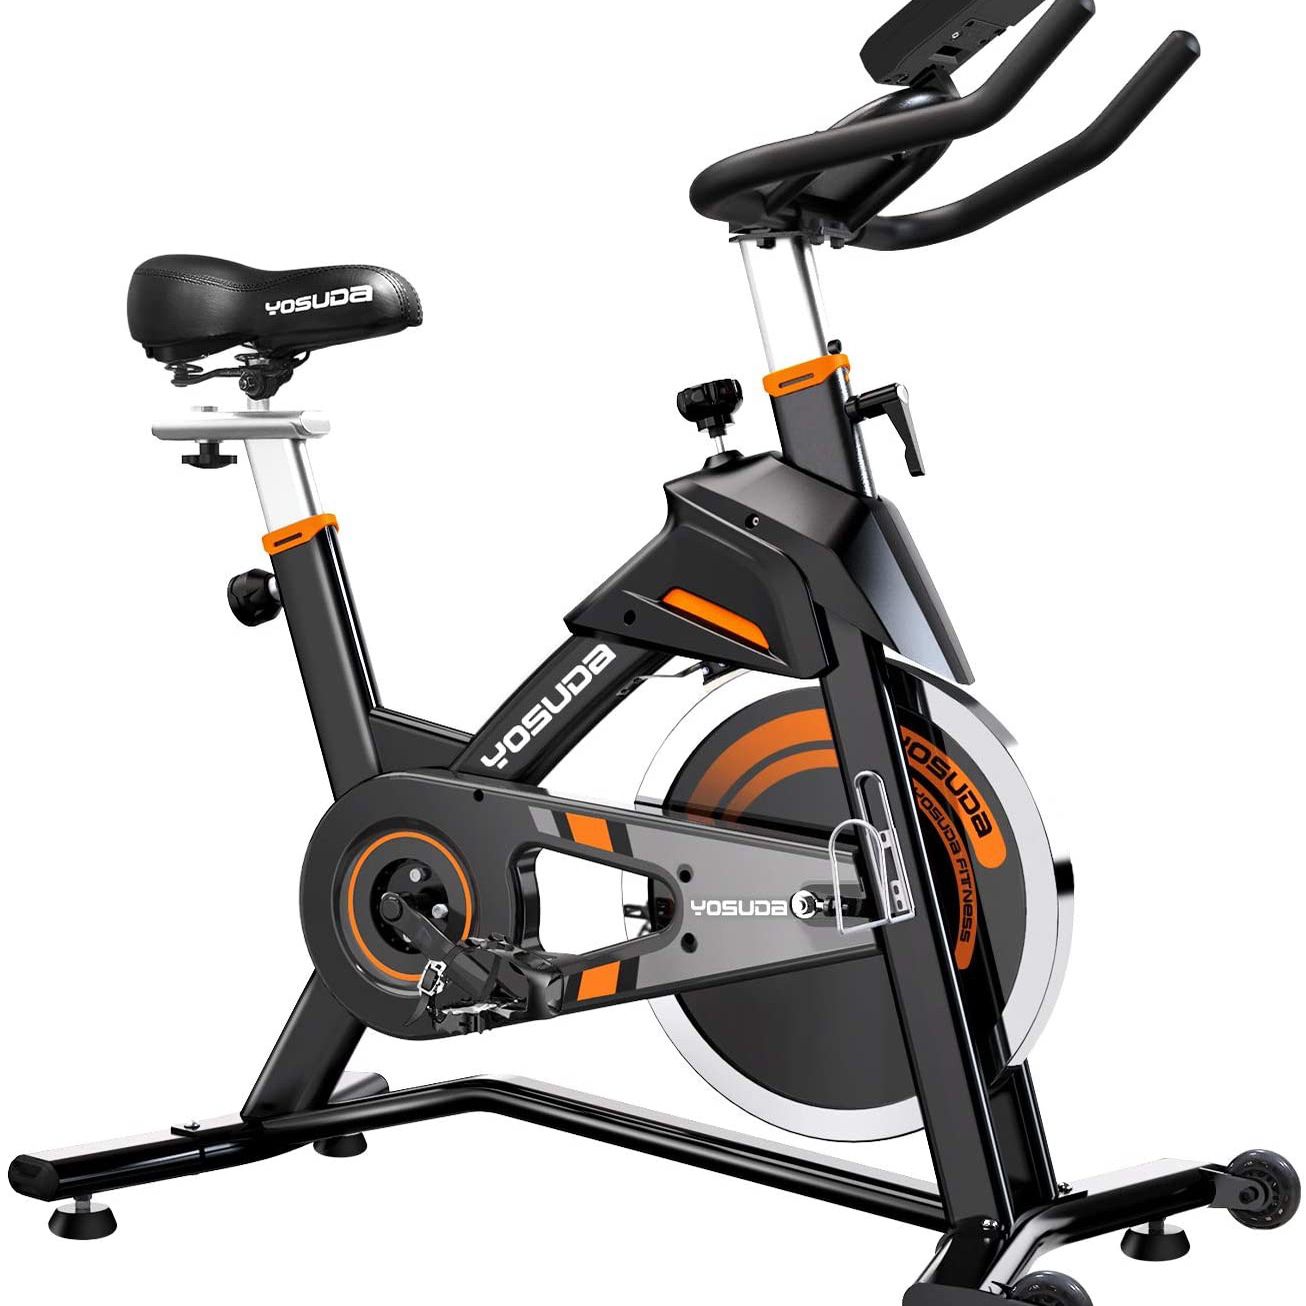 Yosuda Indoor Cycling Spin Bike - Black – Exercise Bike for Home Gym -- Like New